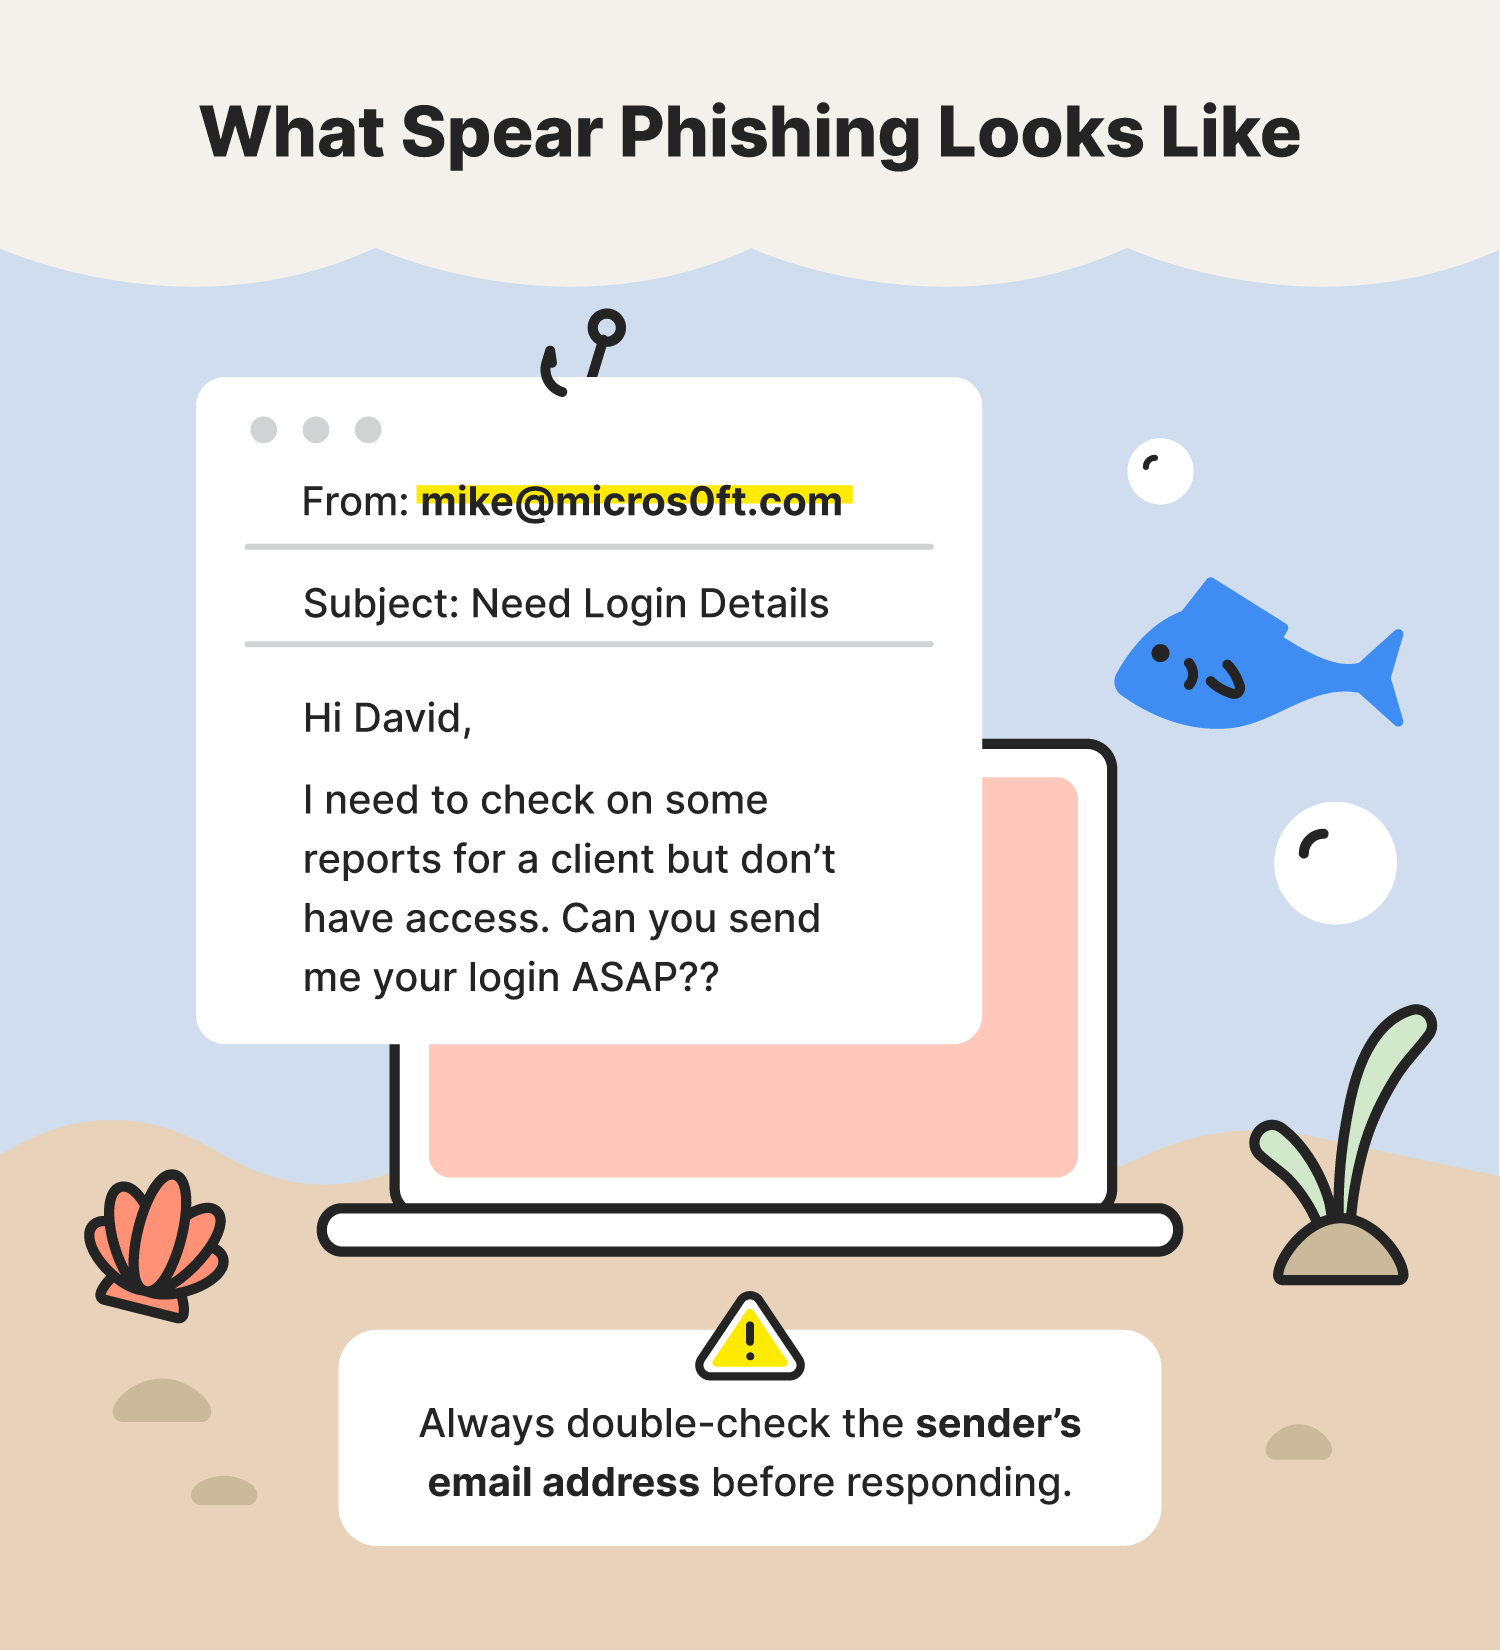 A graphic shows an example of spear phishing, one of the common types of phishing attacks.